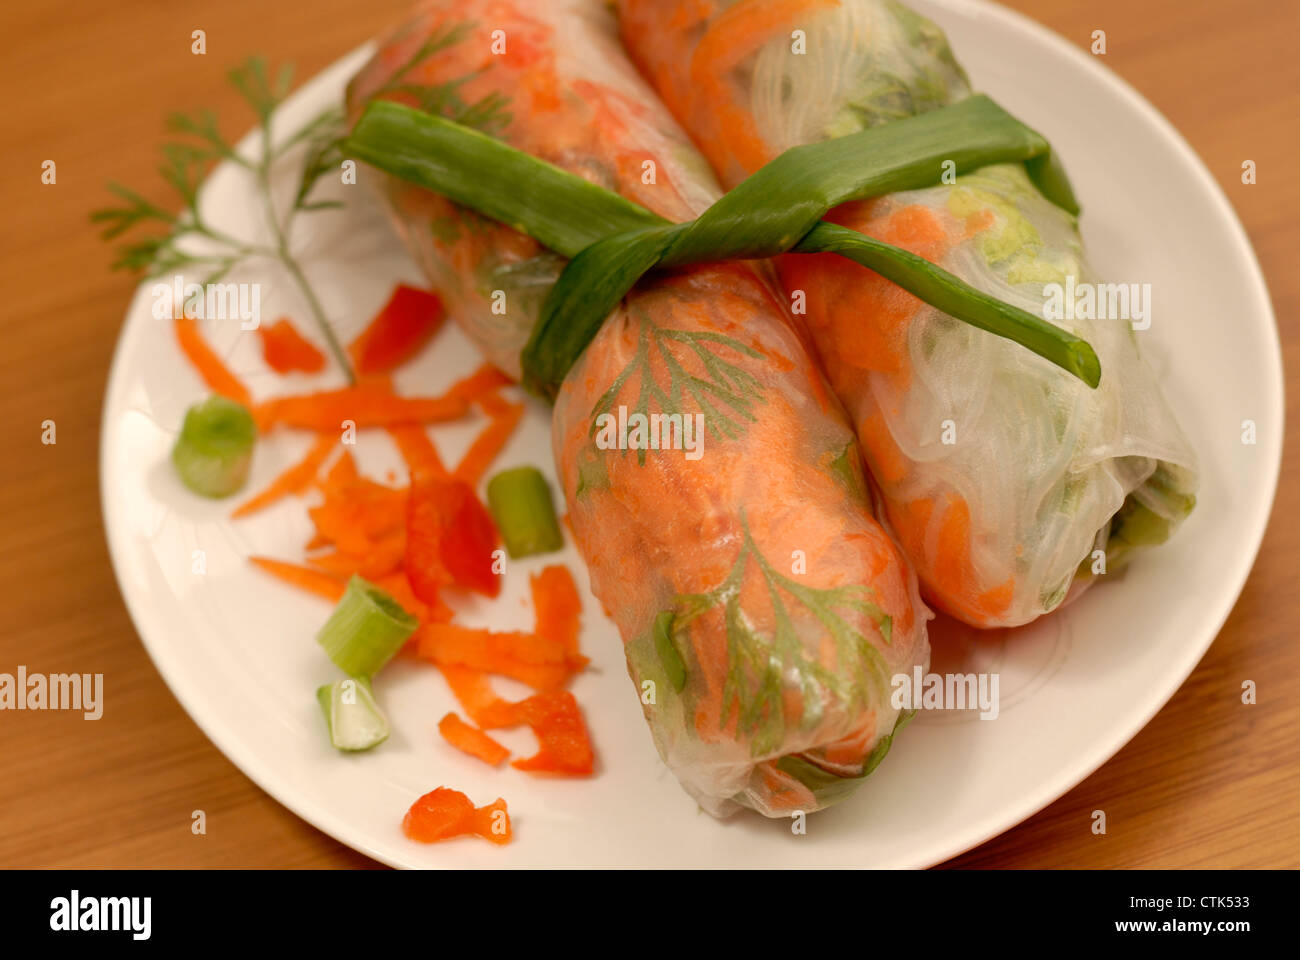 Vietnamese Style Spring Rolls Garnished And Tied Together With A Green Onion Vegetarian And Vegan Appetizer Stock Photo Alamy